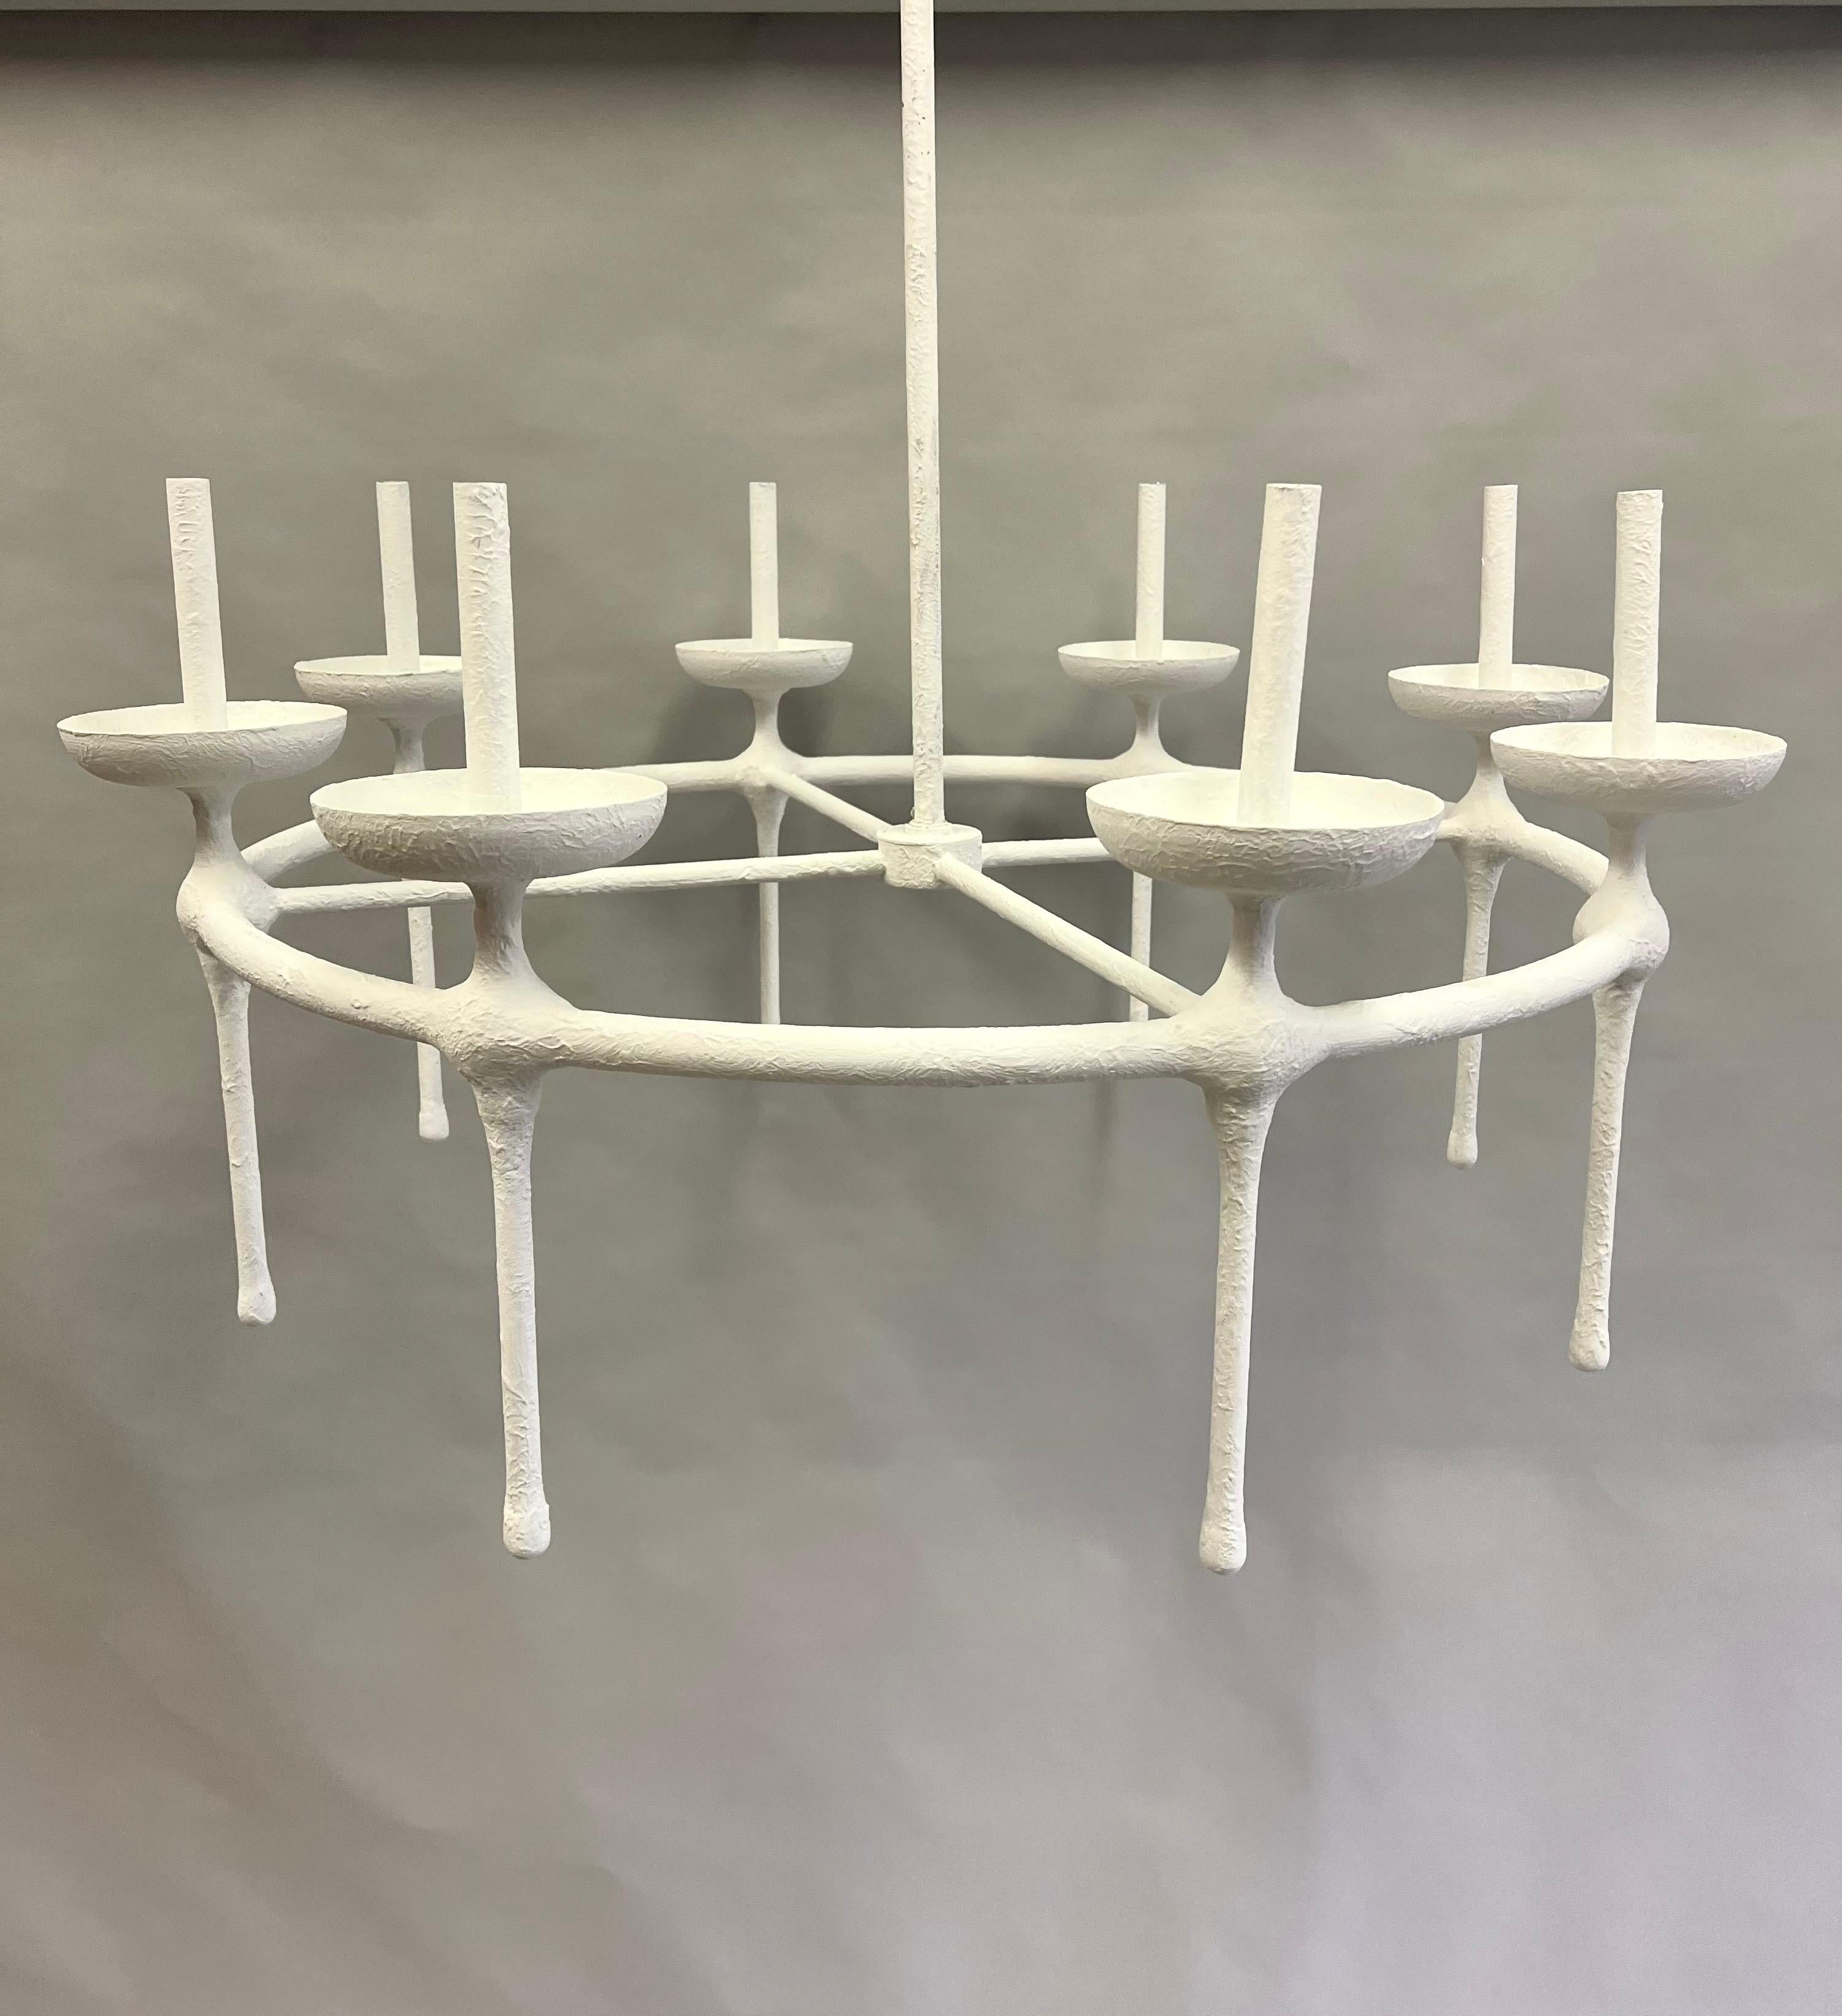 Elegant and iconic French Modern Neoclassical chandelier in the style of Alberto and Diego Giacometti. The form is sublime. It is composed of a cylindrical iron base from which 8 torch lights are suspended and united around a cross form stretcher.